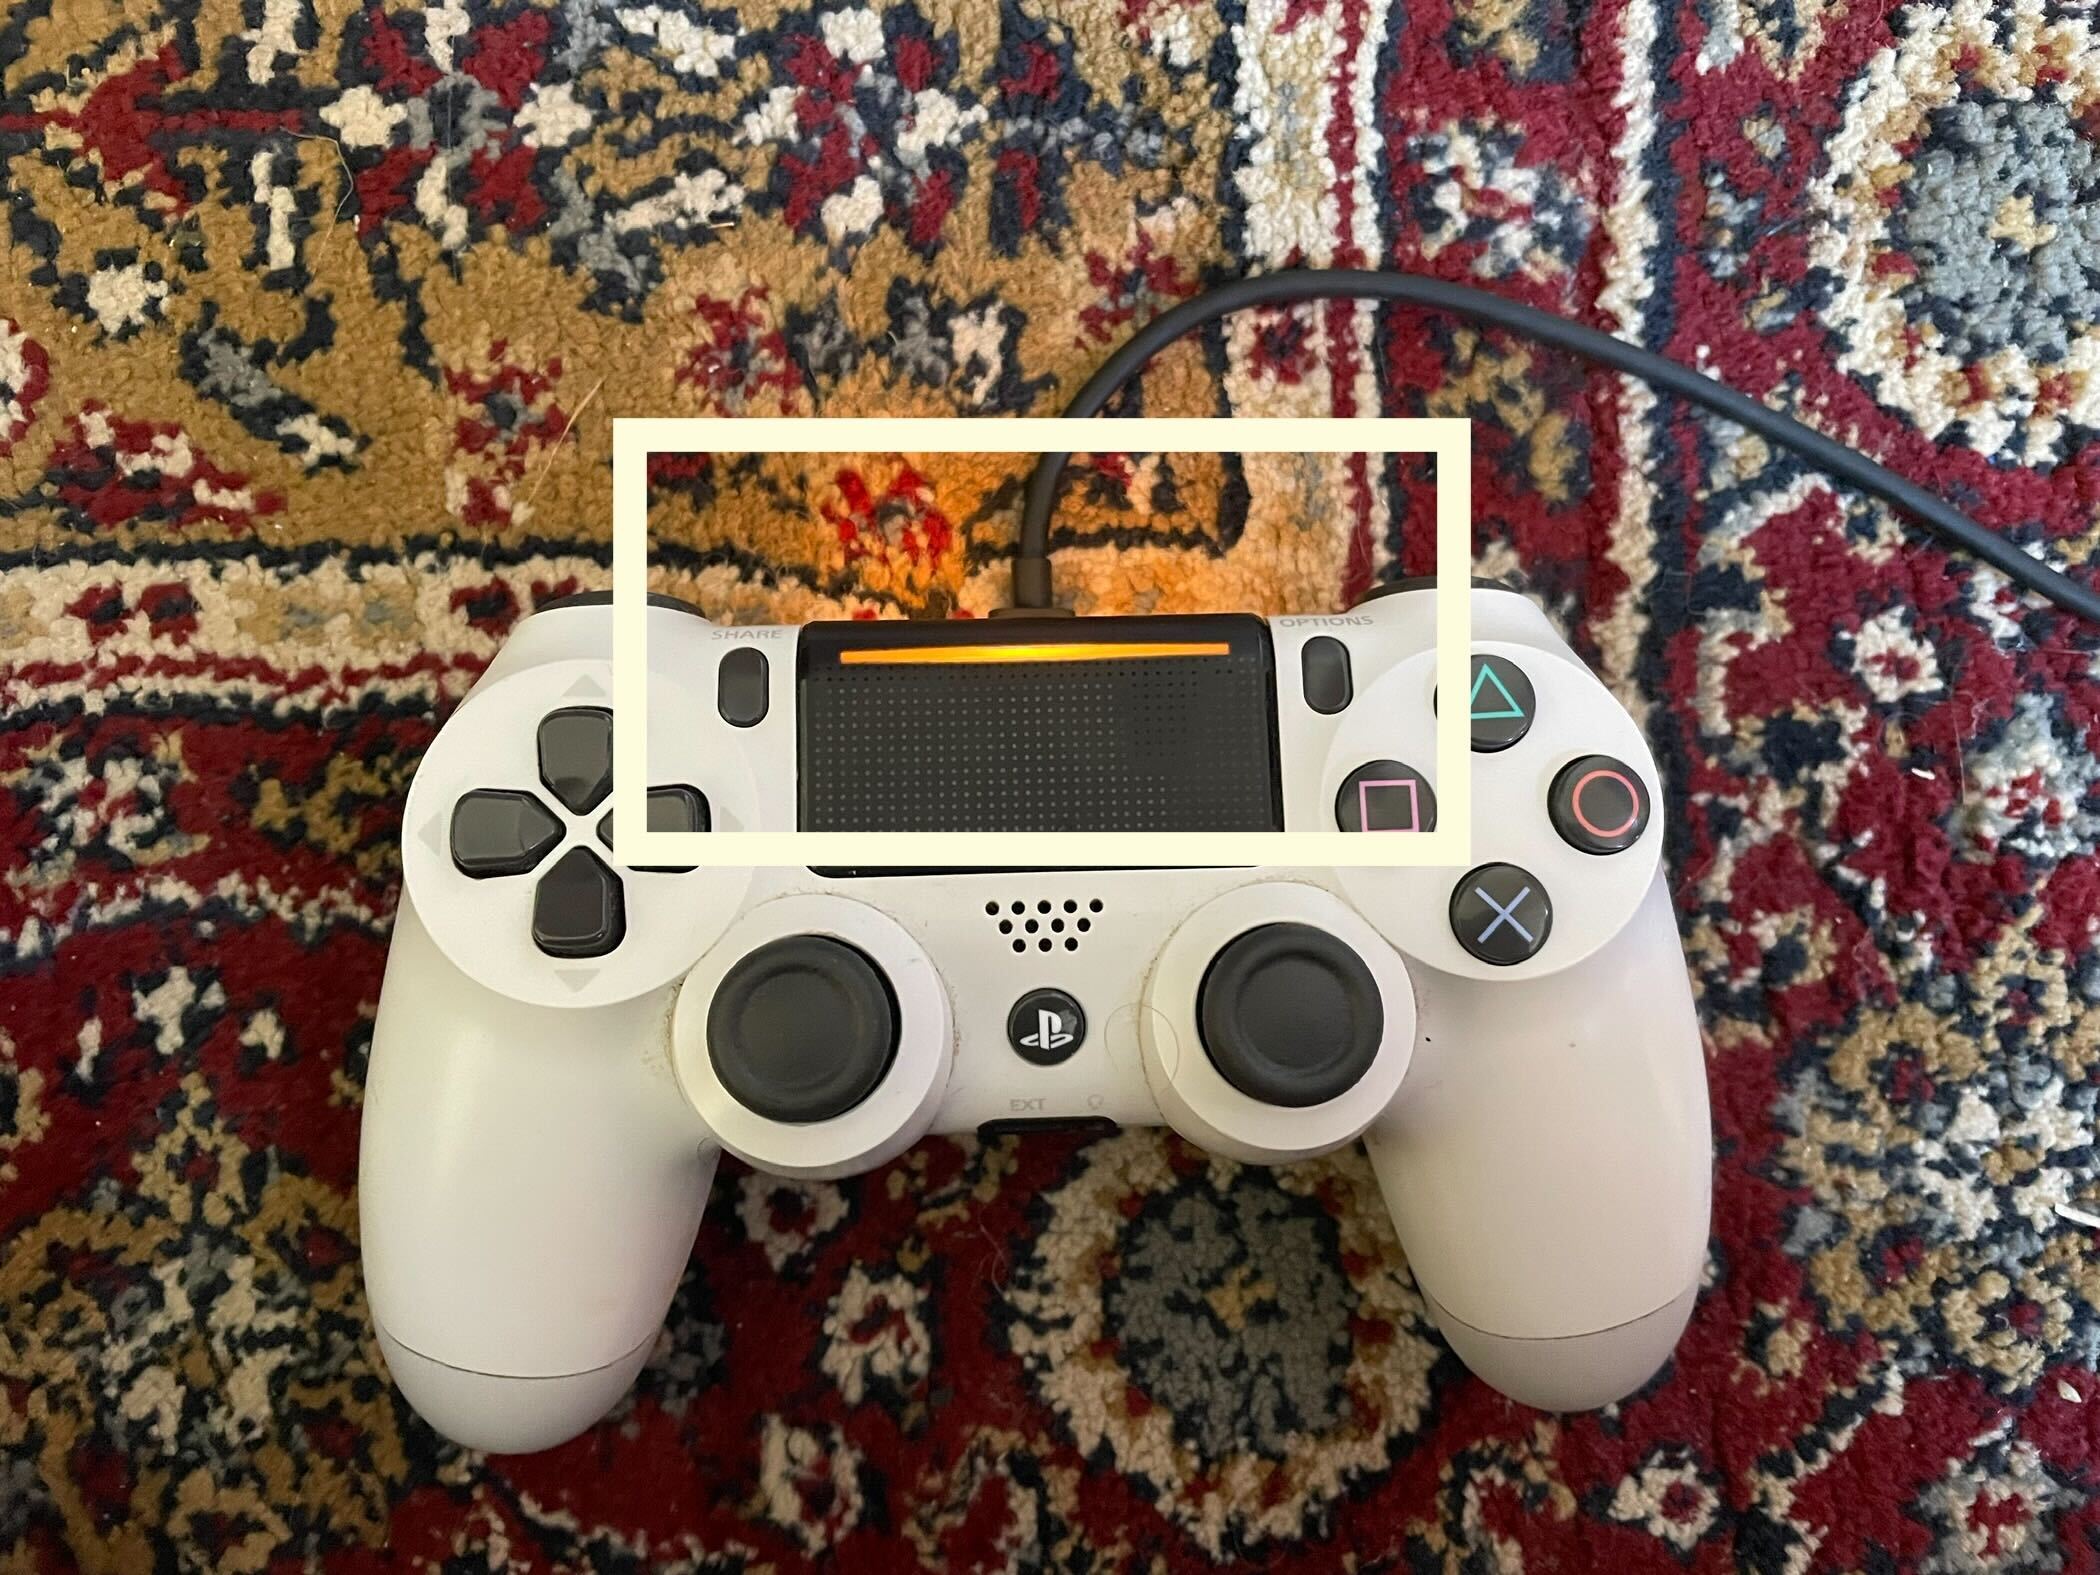 Plug the PS4 controller into the pS4 console